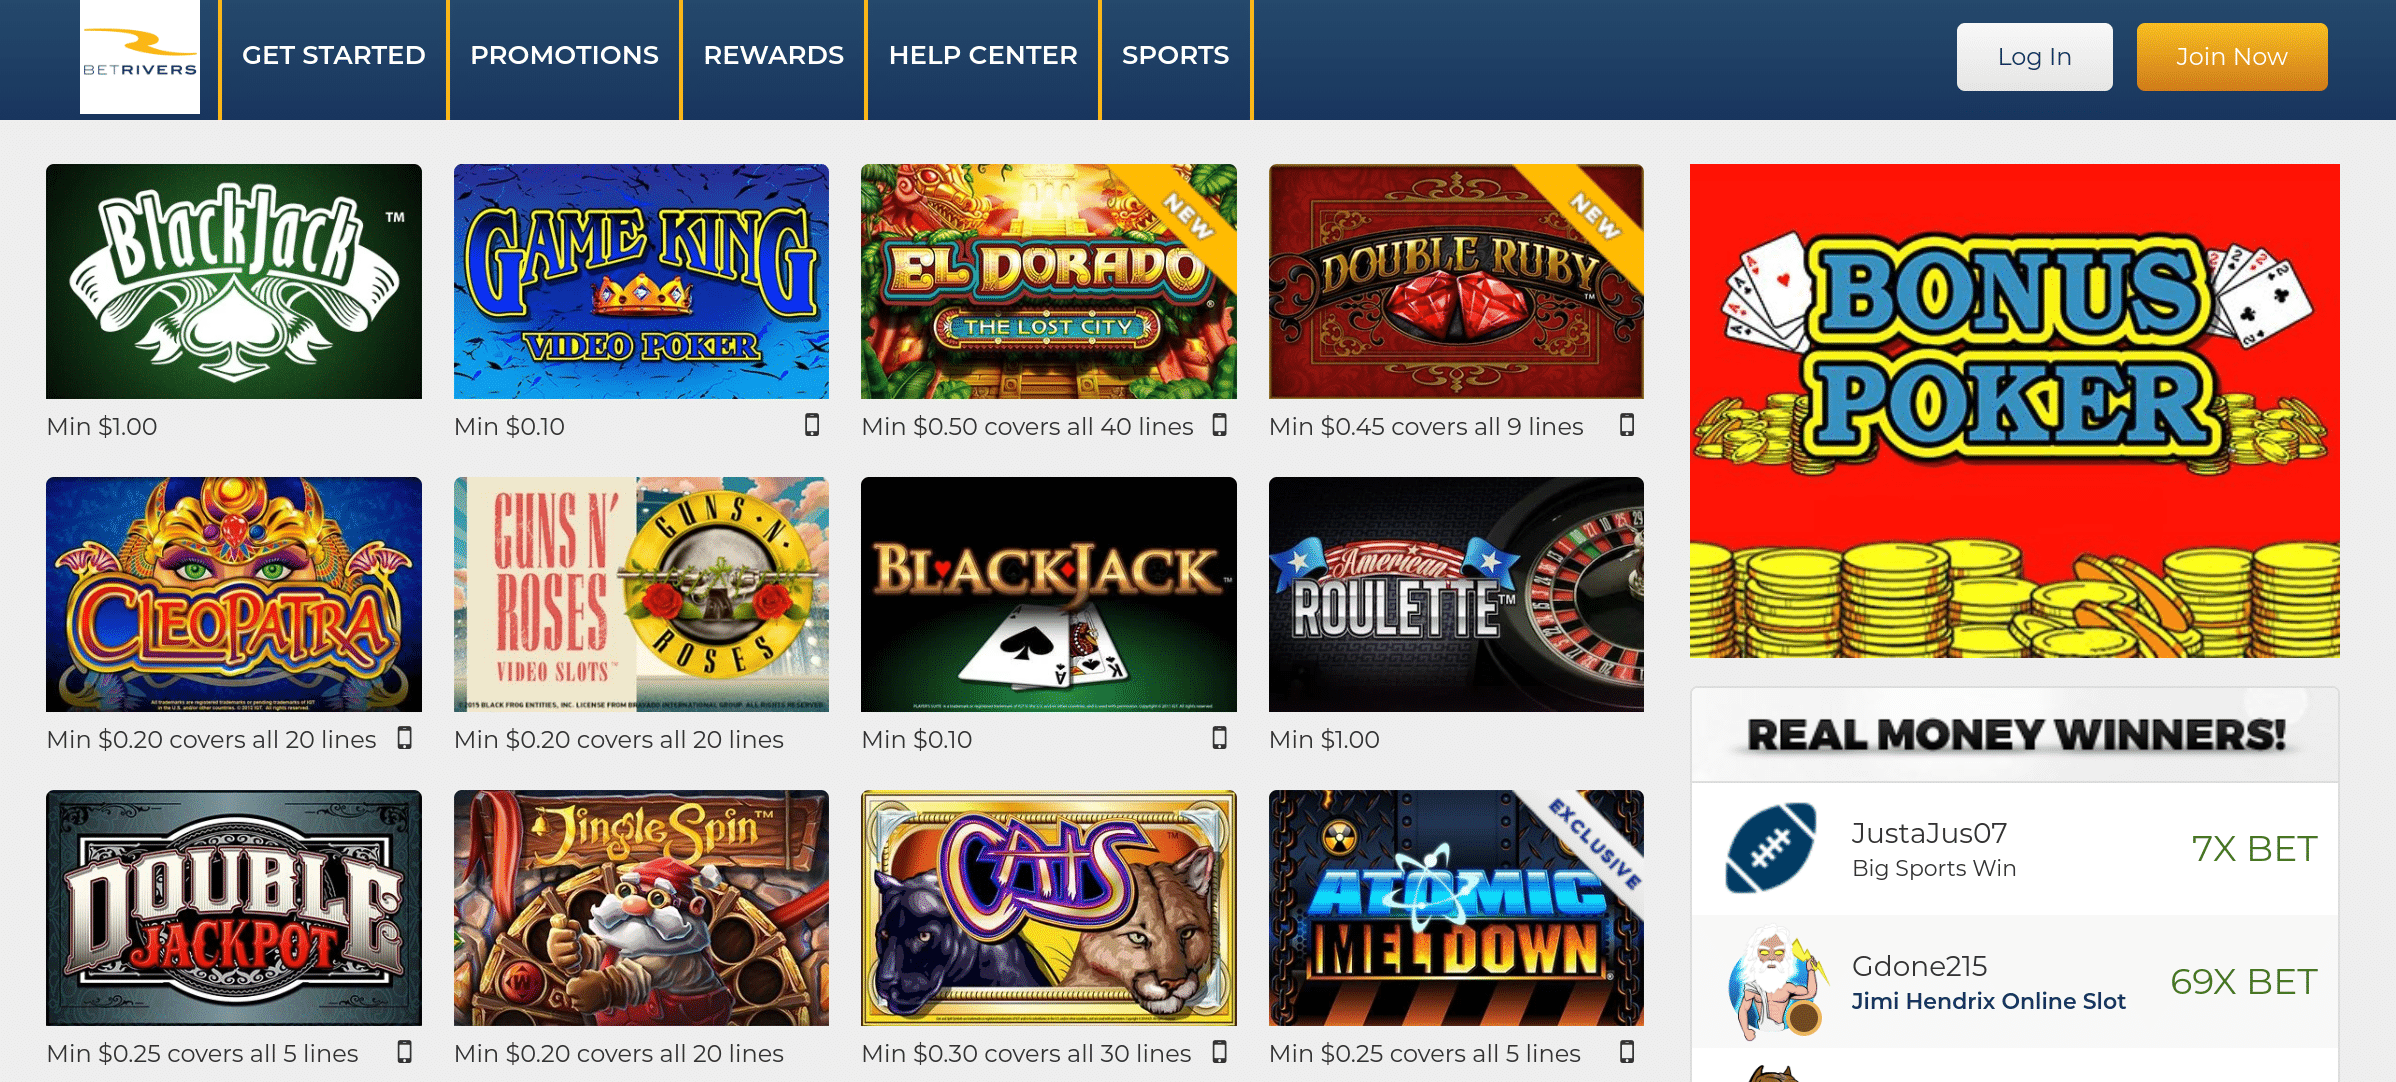 Betrivers online casino review